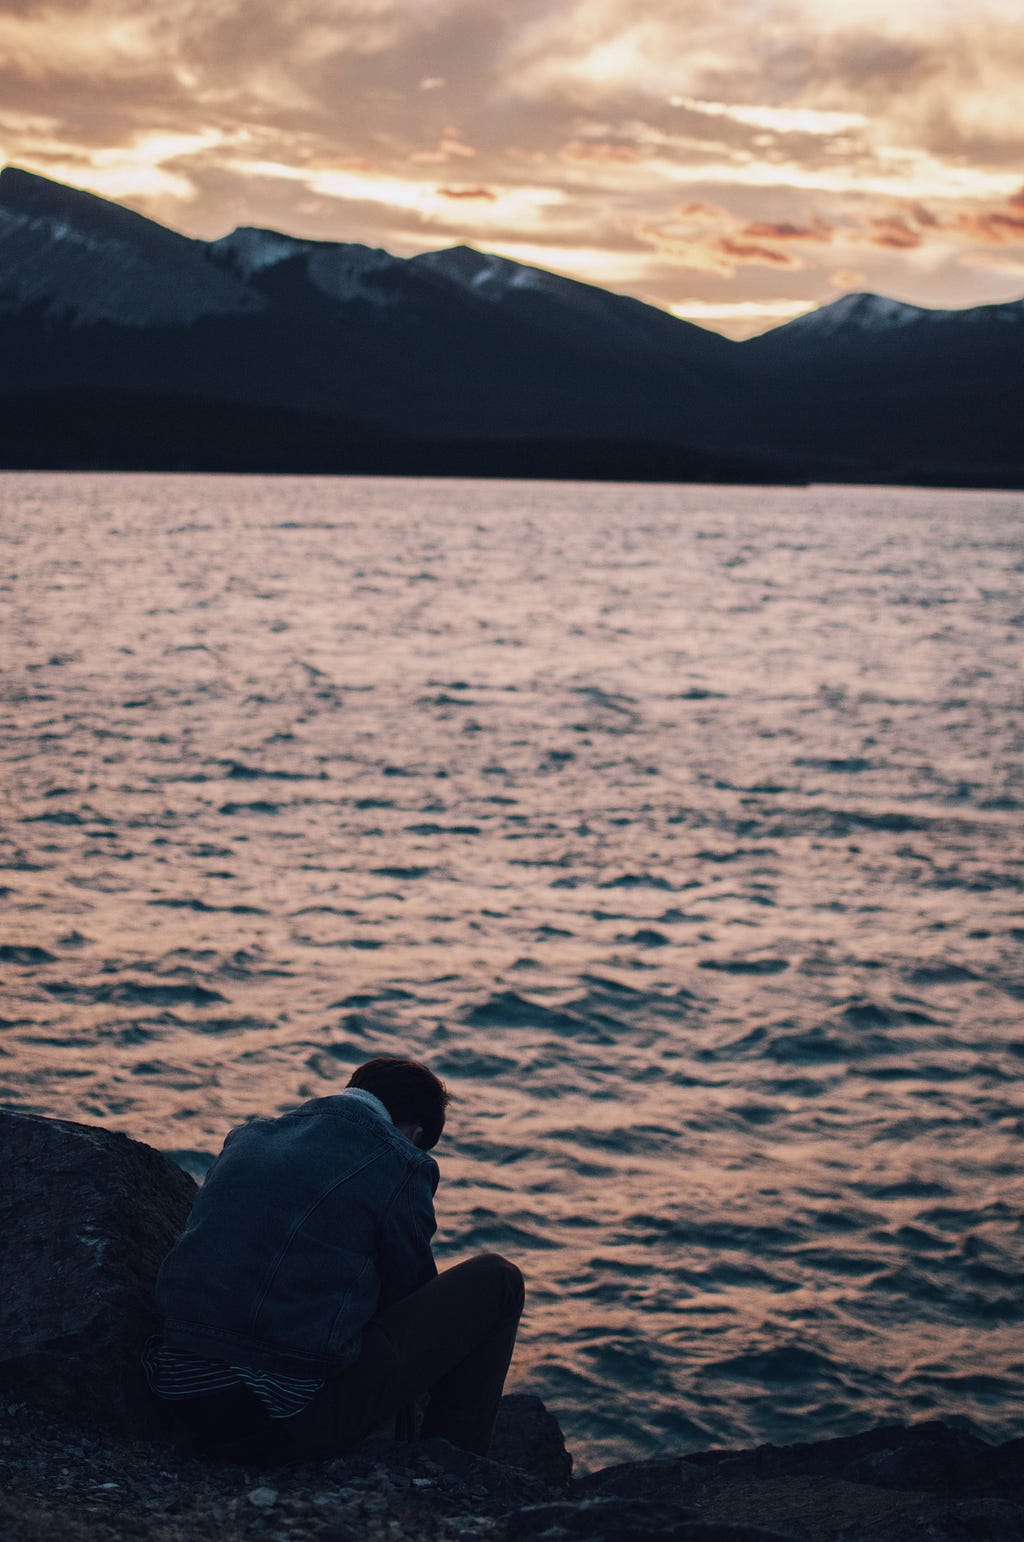 A boy sitting alone by the shore at dusk